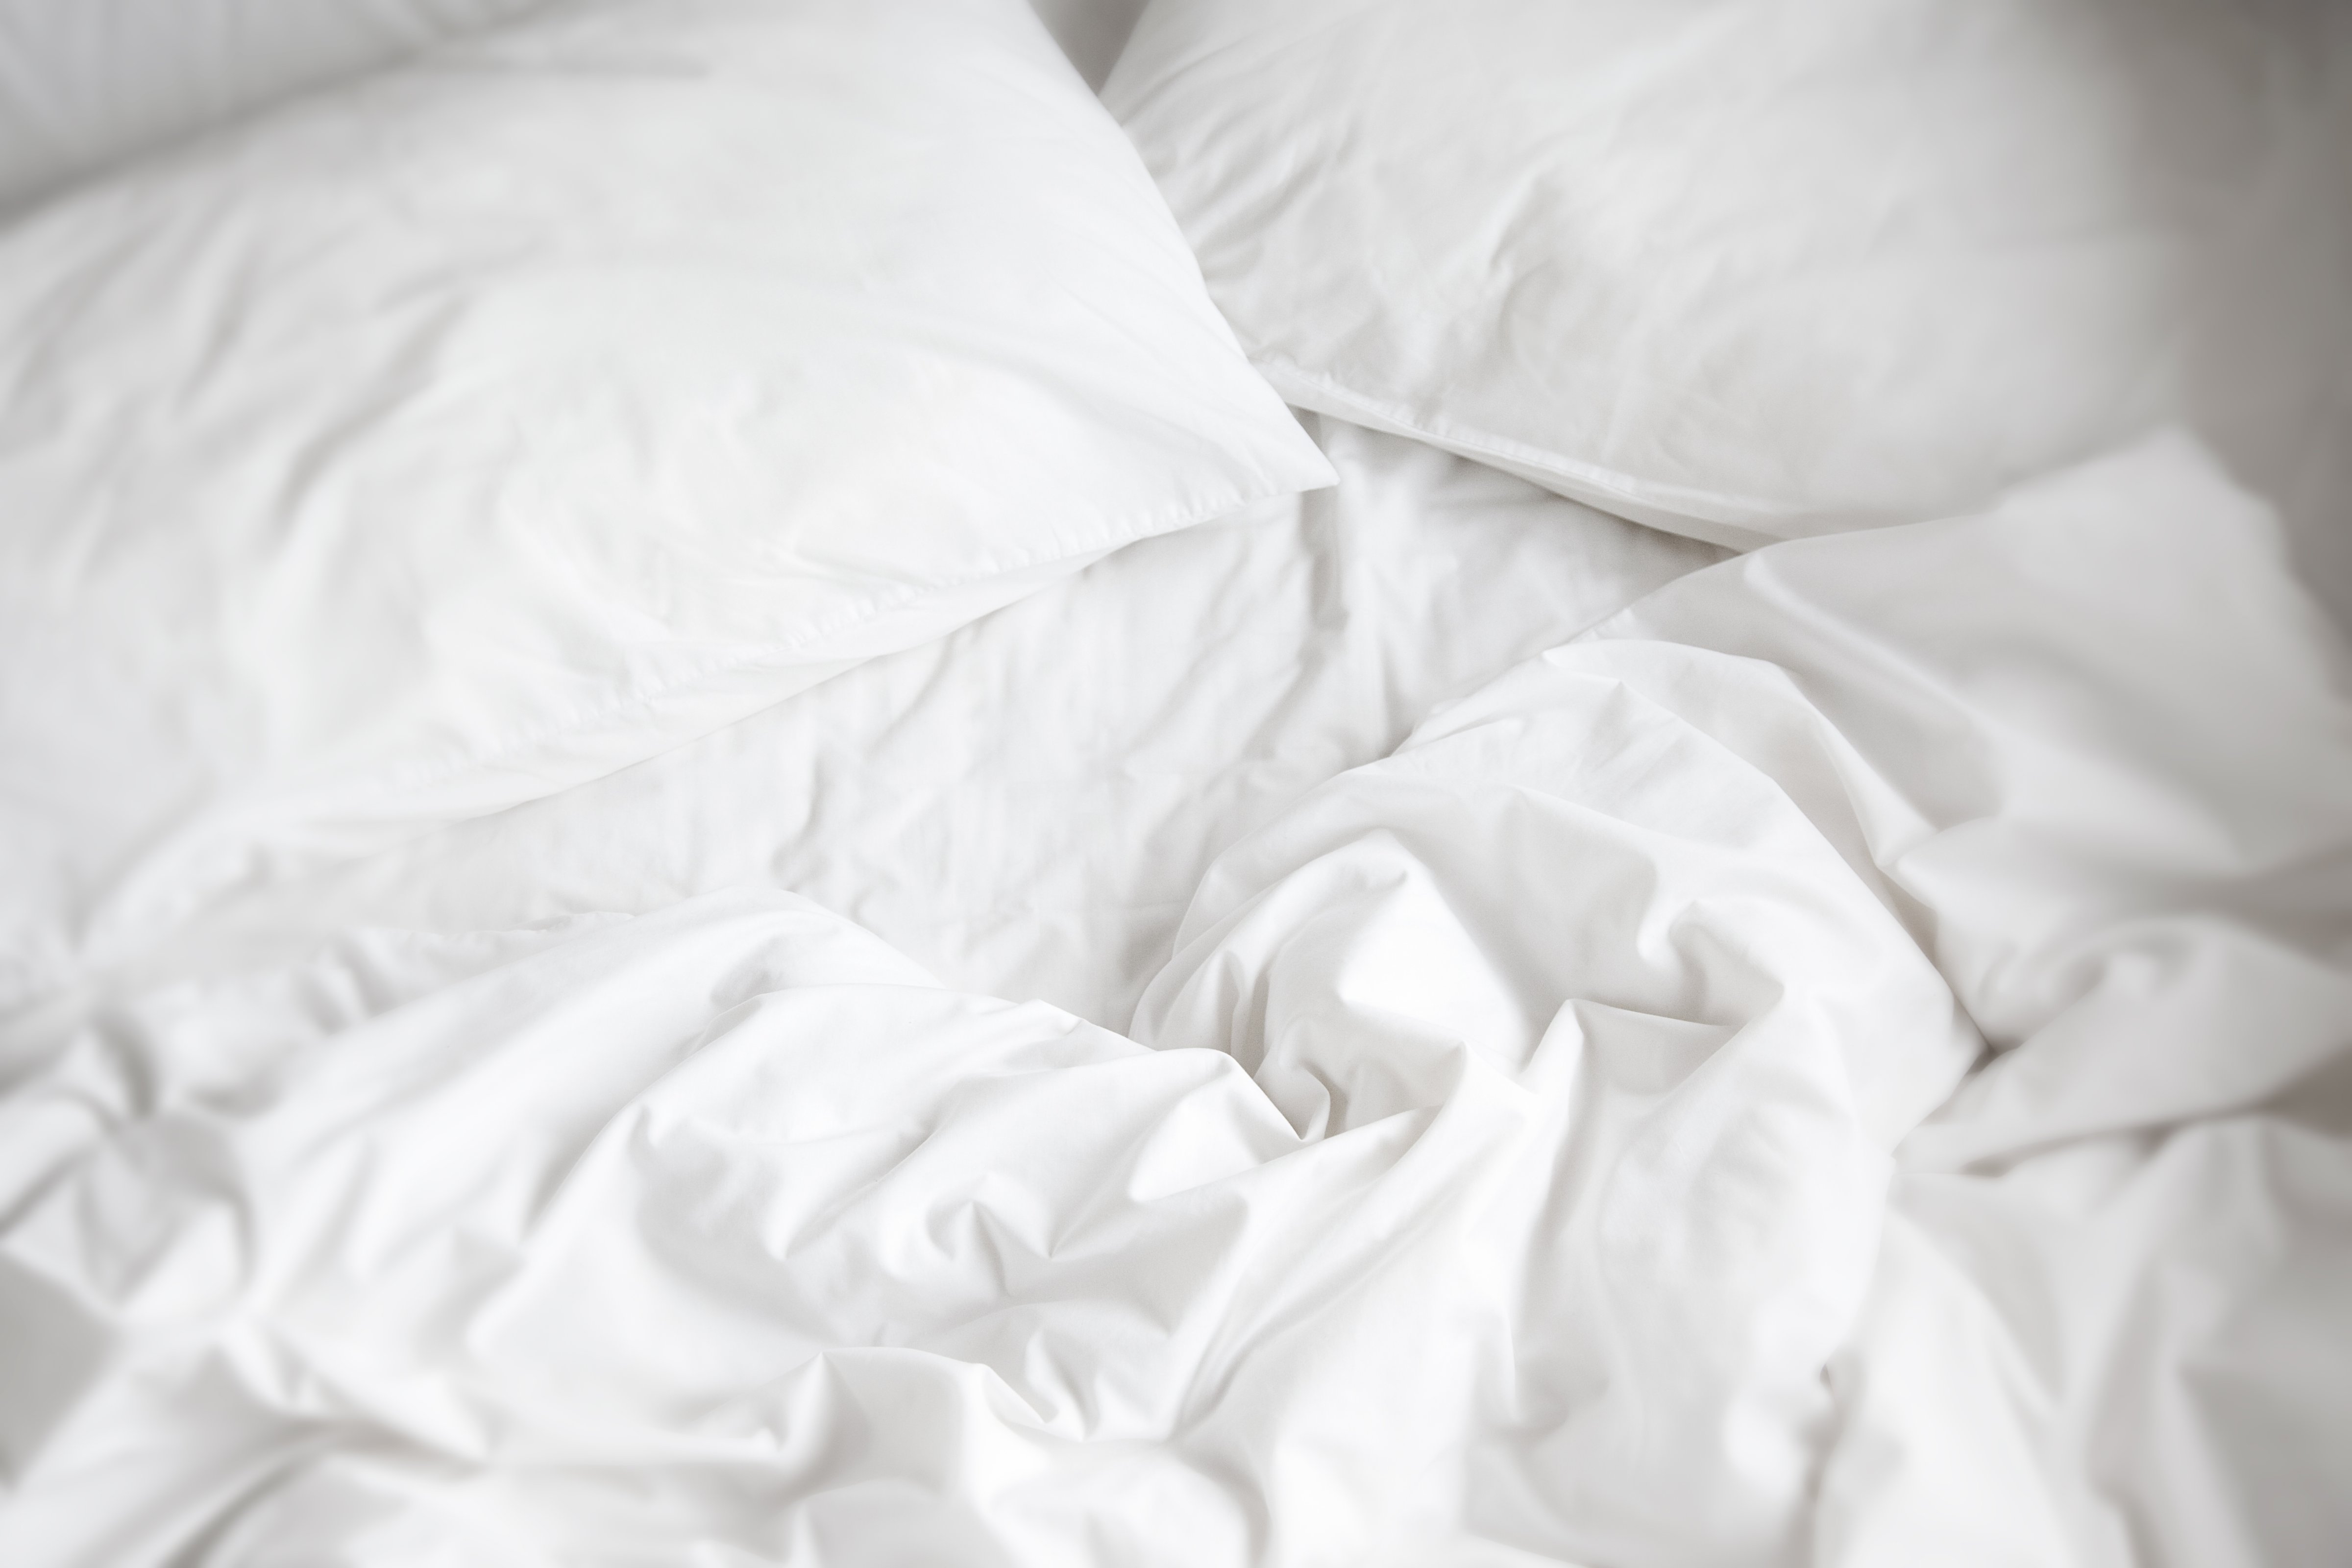 White Bed Sheets